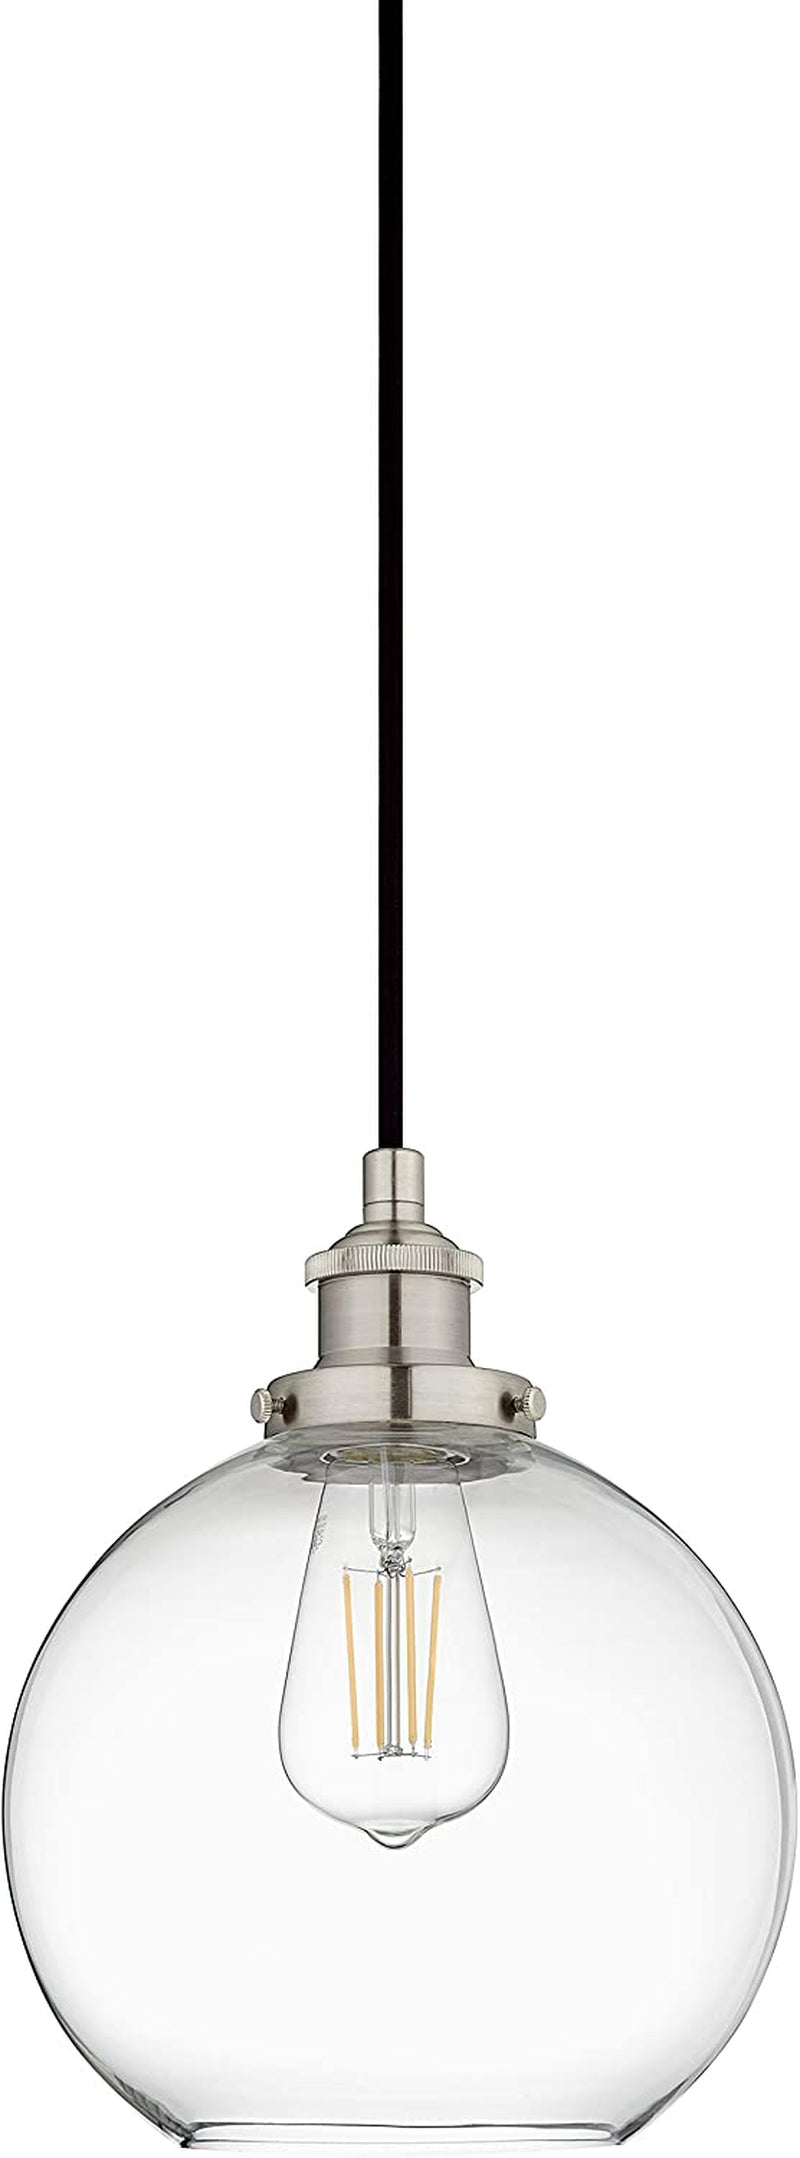 Linea Di Liara Primo Large Black and Gold Glass Globe Pendant Light Fixture Farmhouse Pendant Lighting for Kitchen Island Mid Century Modern Ceiling Light Clear Glass Shade, UL Listed Home & Garden > Lighting > Lighting Fixtures Linea di Liara Brushed Nickel Clear Glass 